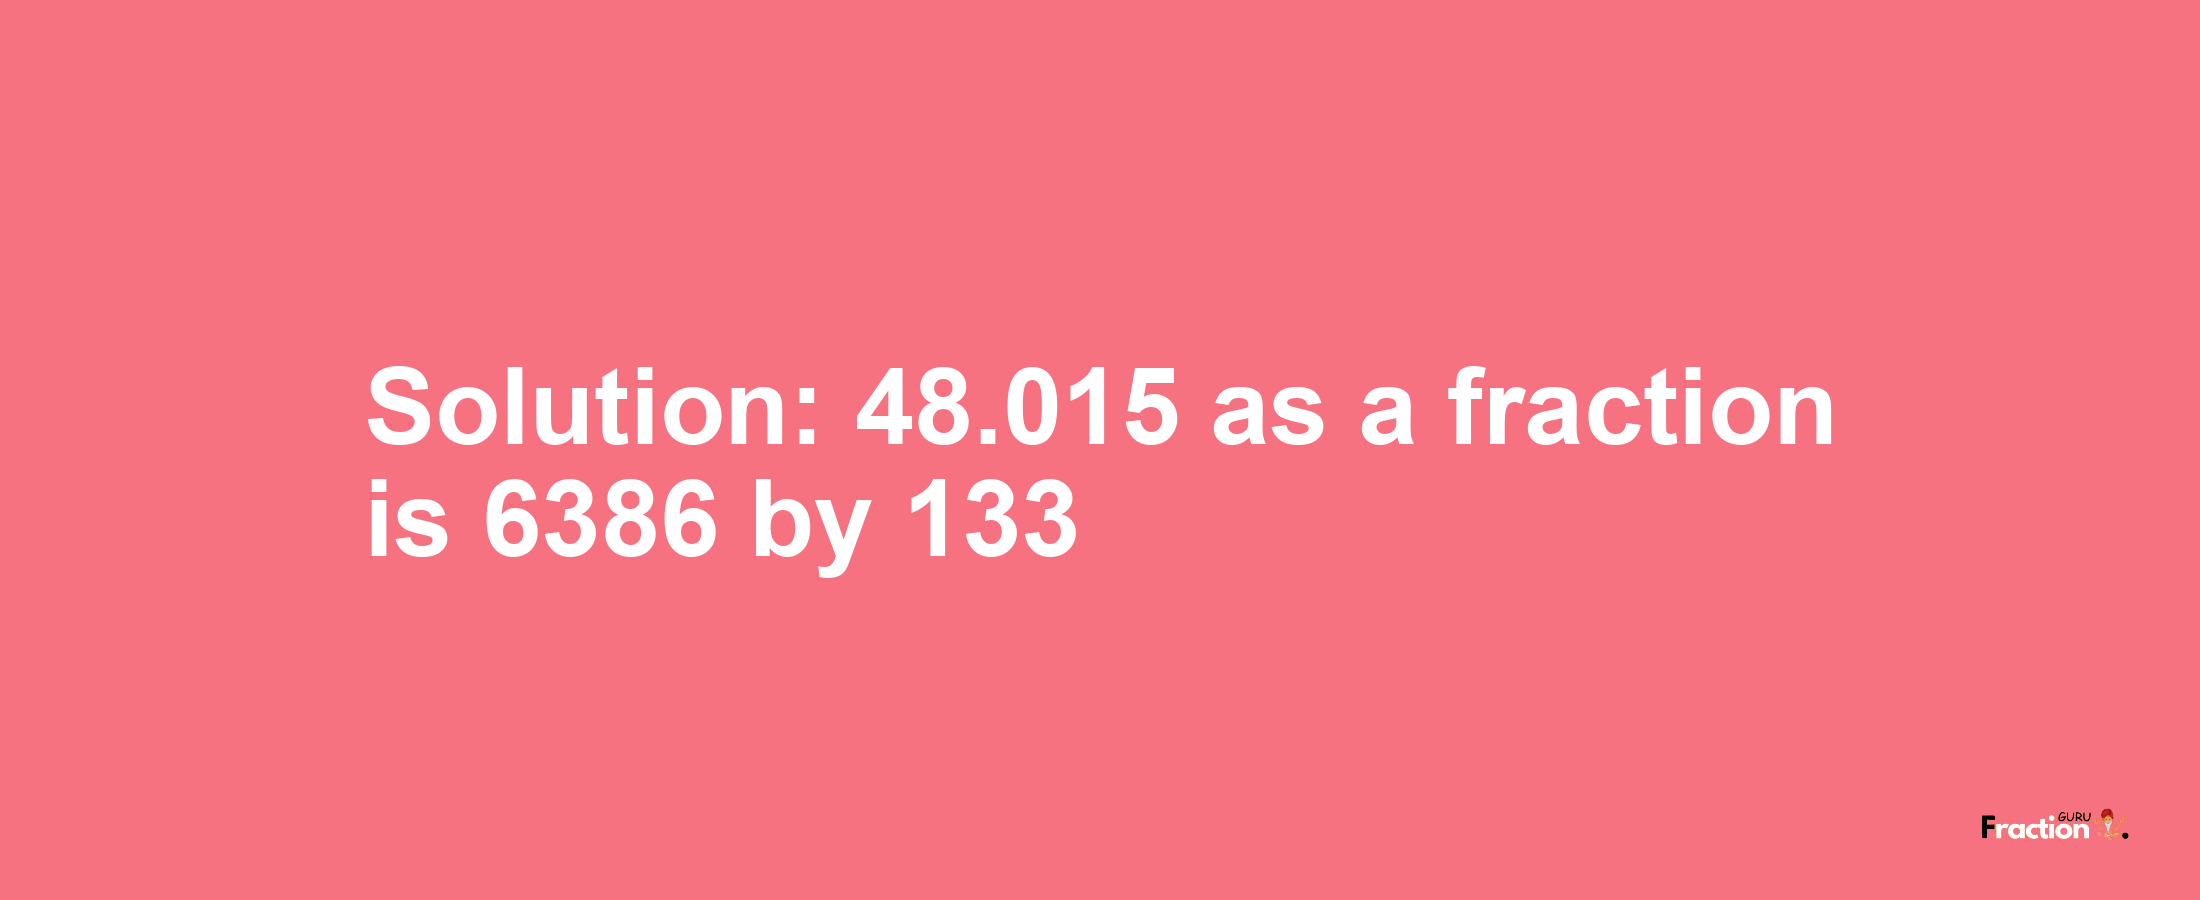 Solution:48.015 as a fraction is 6386/133